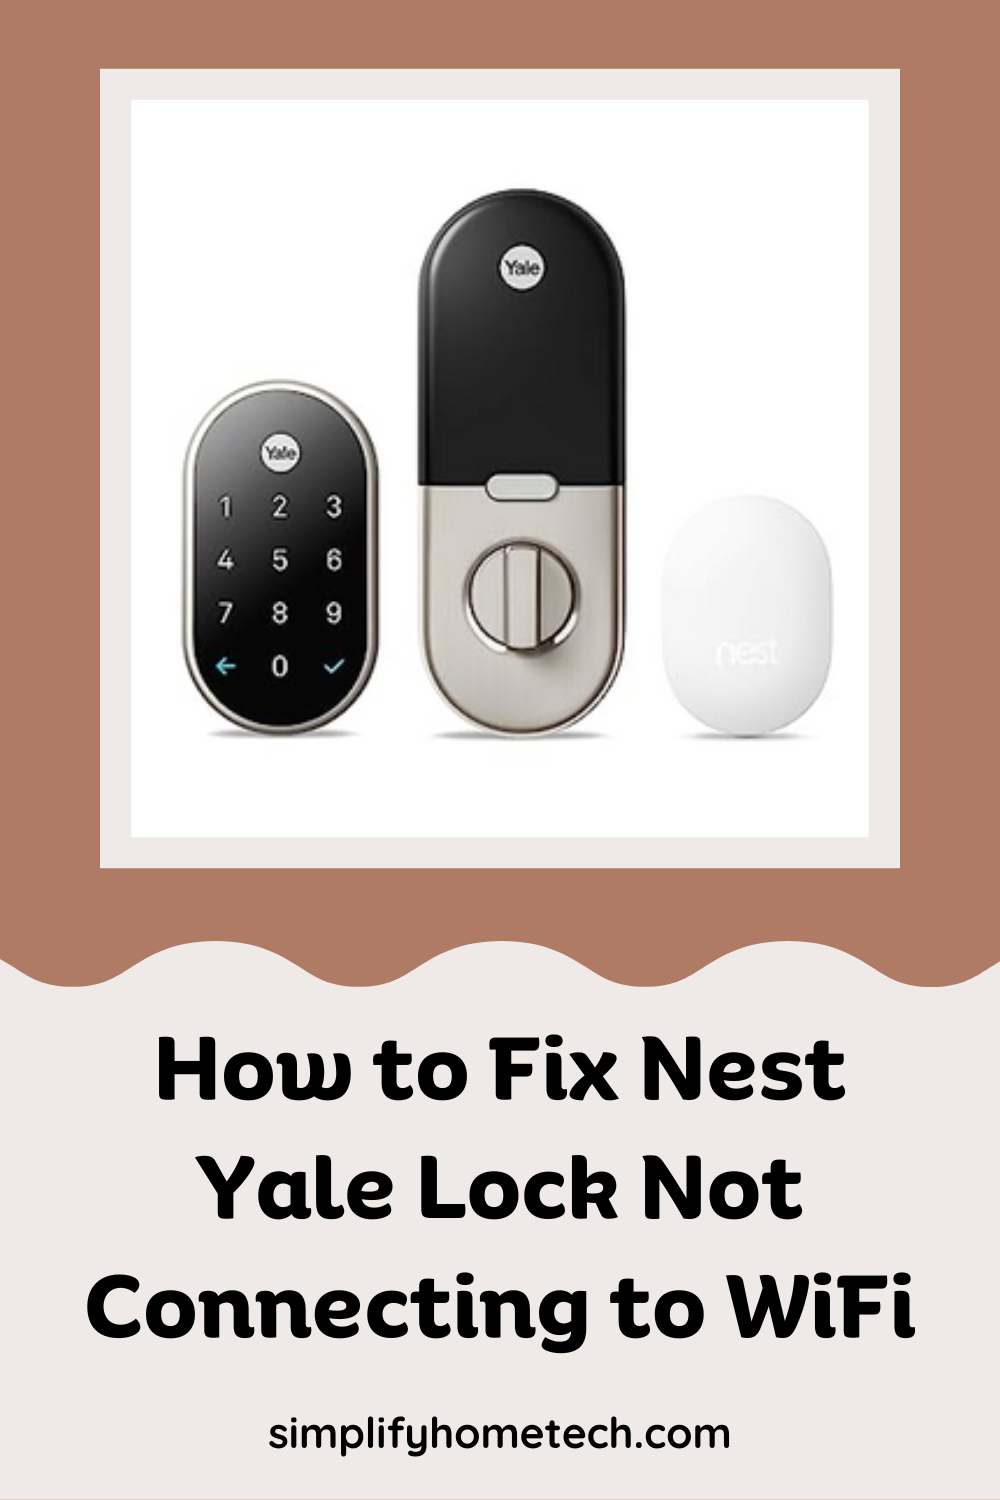 How to Fix Nest Yale Lock Not Connecting to WiFi